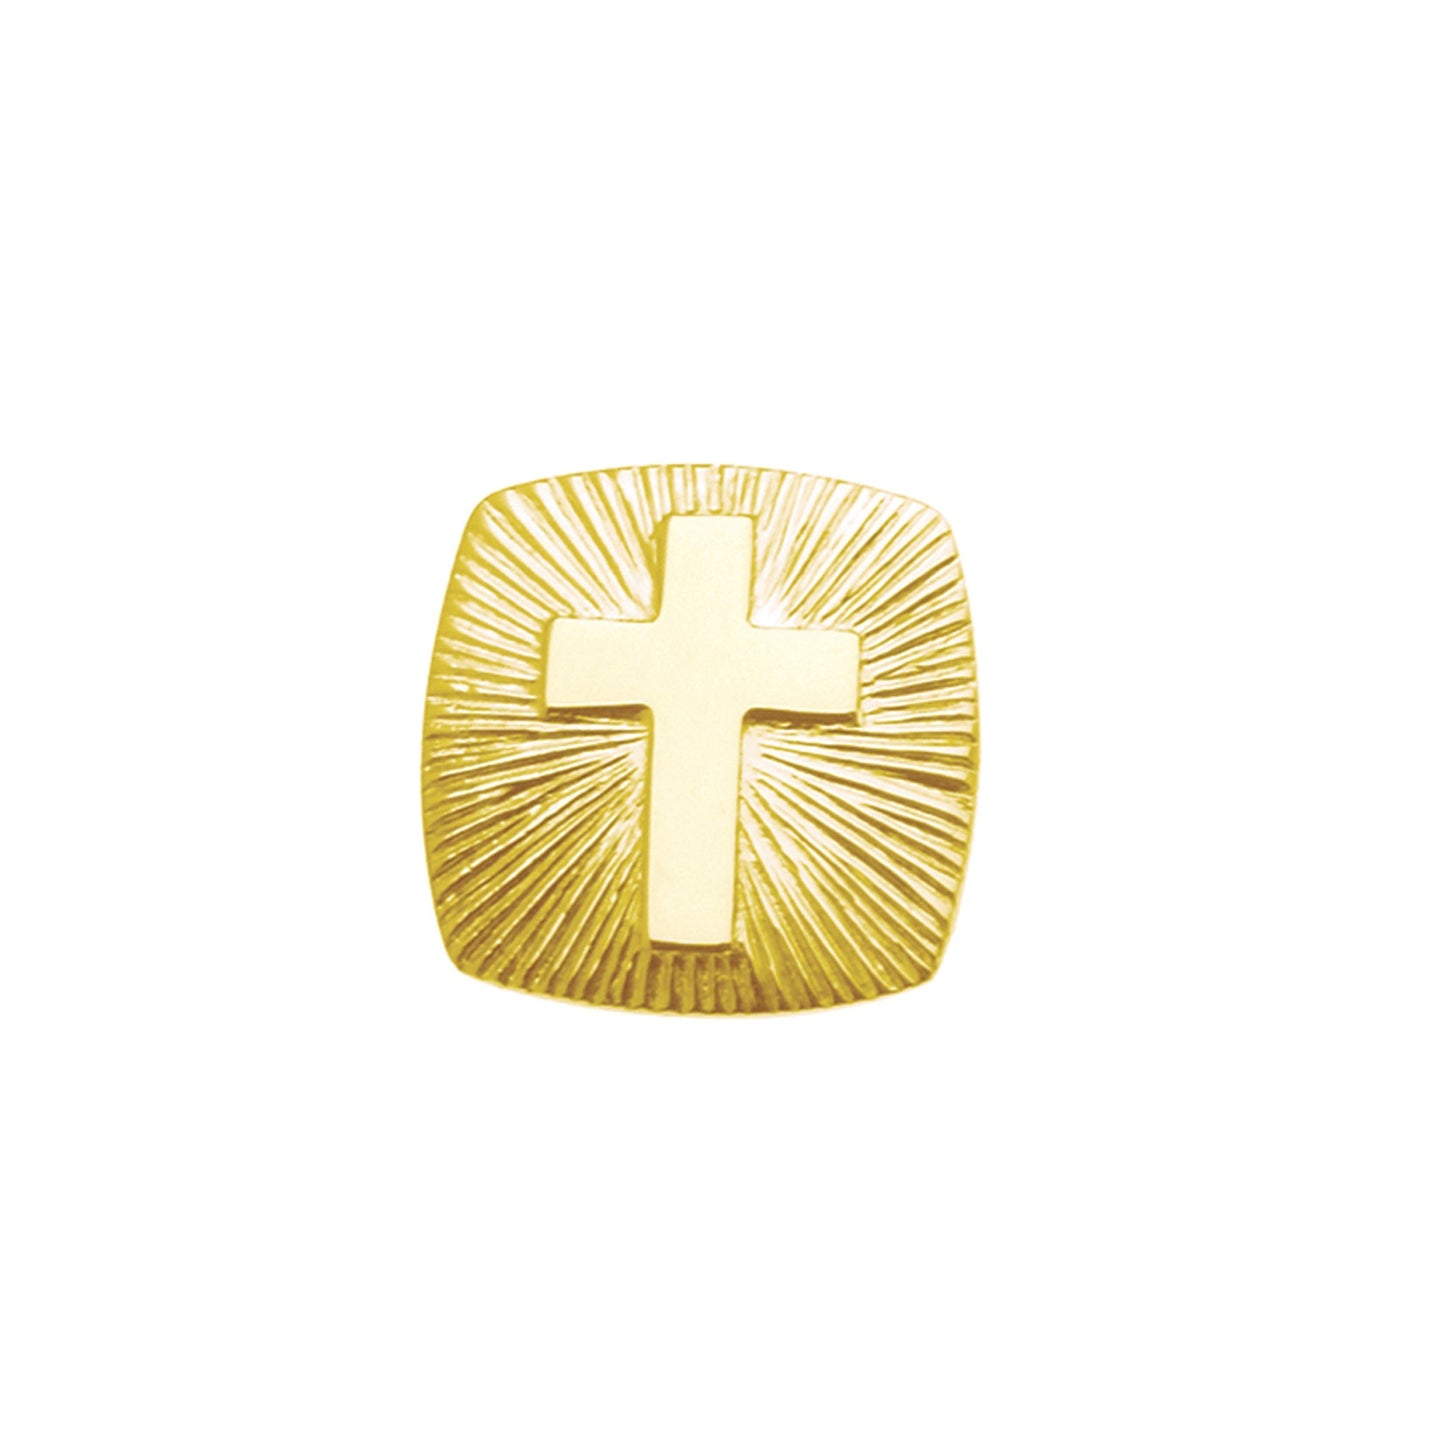 A gold cross tie tack displayed on a neutral white background.